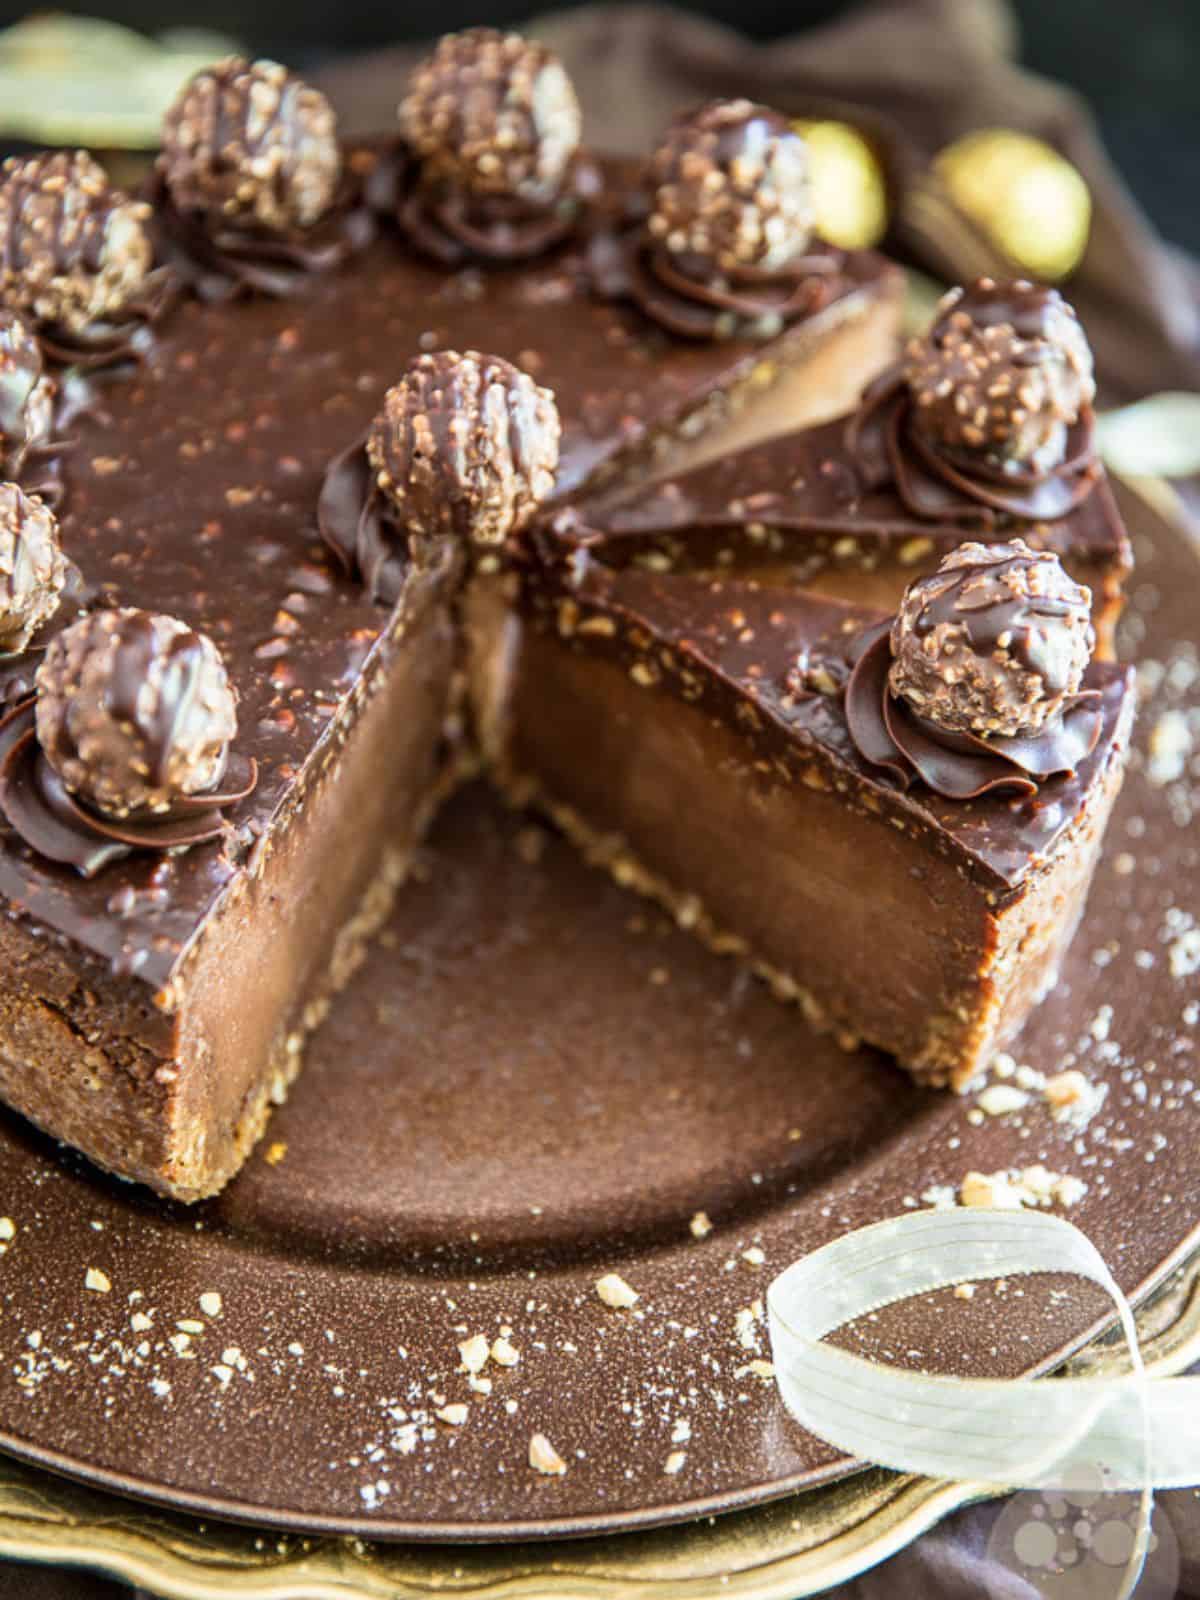 Ferrero Rocher Nutella cheesecake made with crunchy crust, cheesecake filling, hazelnut spread, and melted chocolate, topped with Ferrero Rocher-like truffles and Nutella ganache.